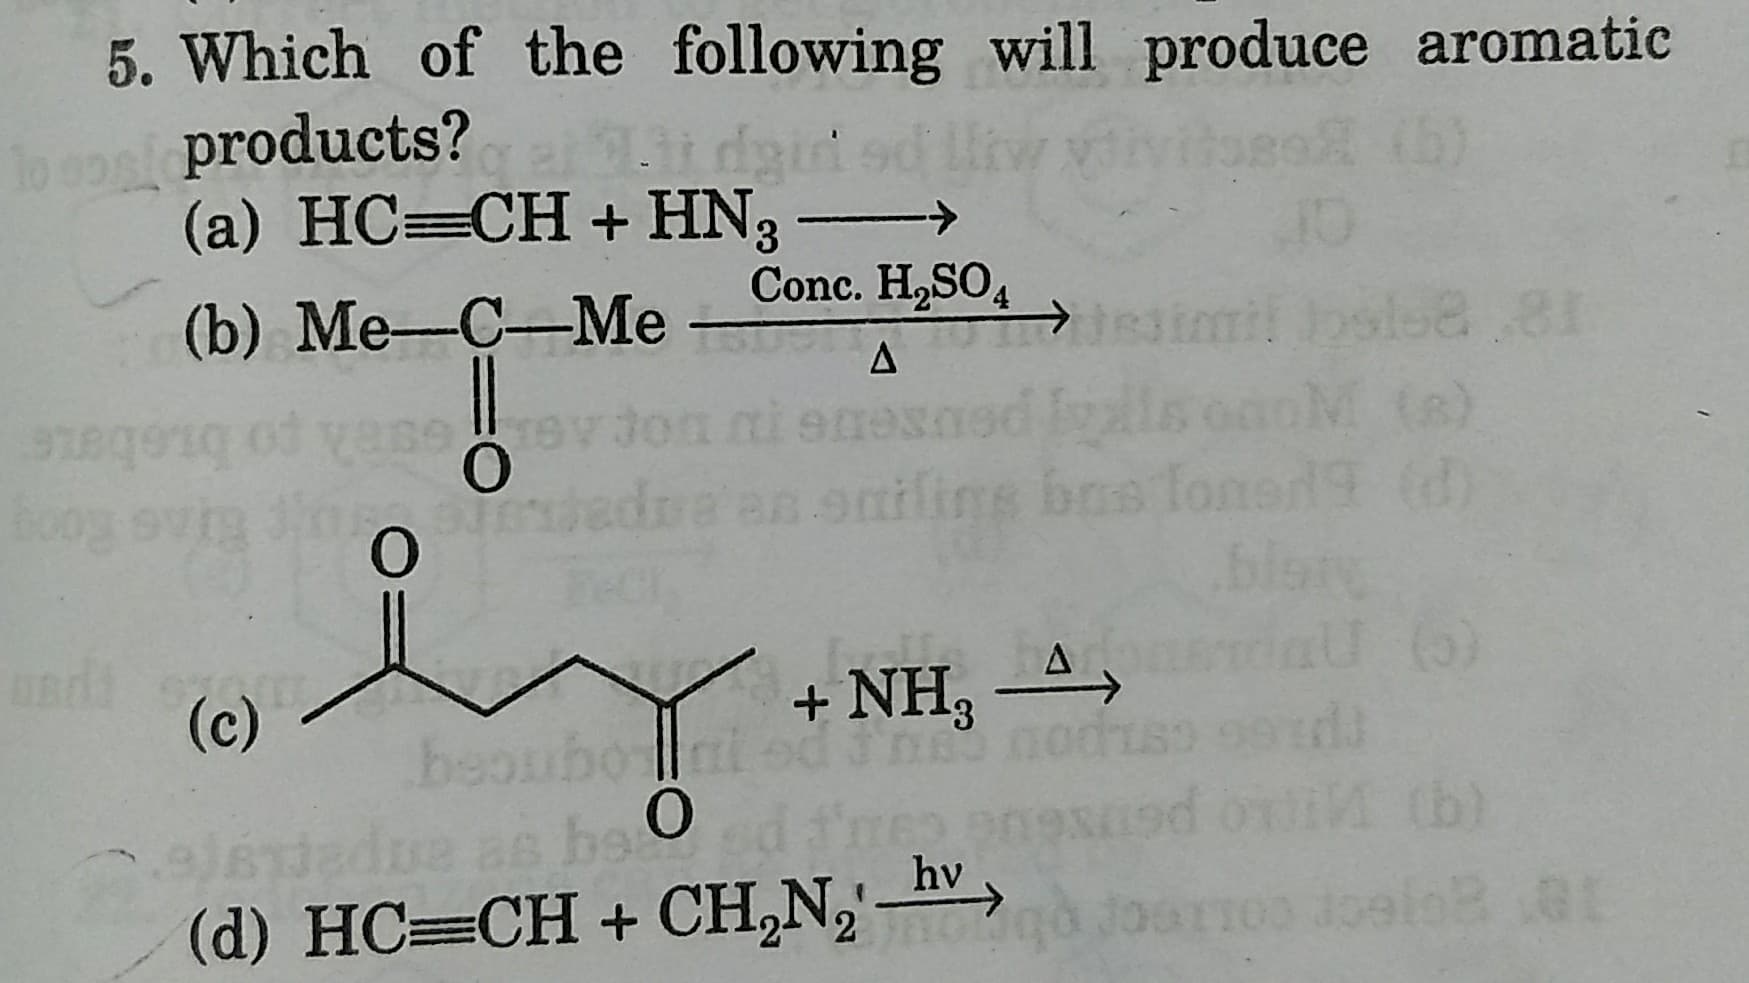 5. Which of the following will produce aromatic
p products?
(a) HC=CH+ HN3
Conc. H,SO4
(b) Me-С—Me
8,81
(3)
anifins bos loned9 d)
blary
(G)
wig in m
SsA po brebe
(c)
+ NH, -A,
